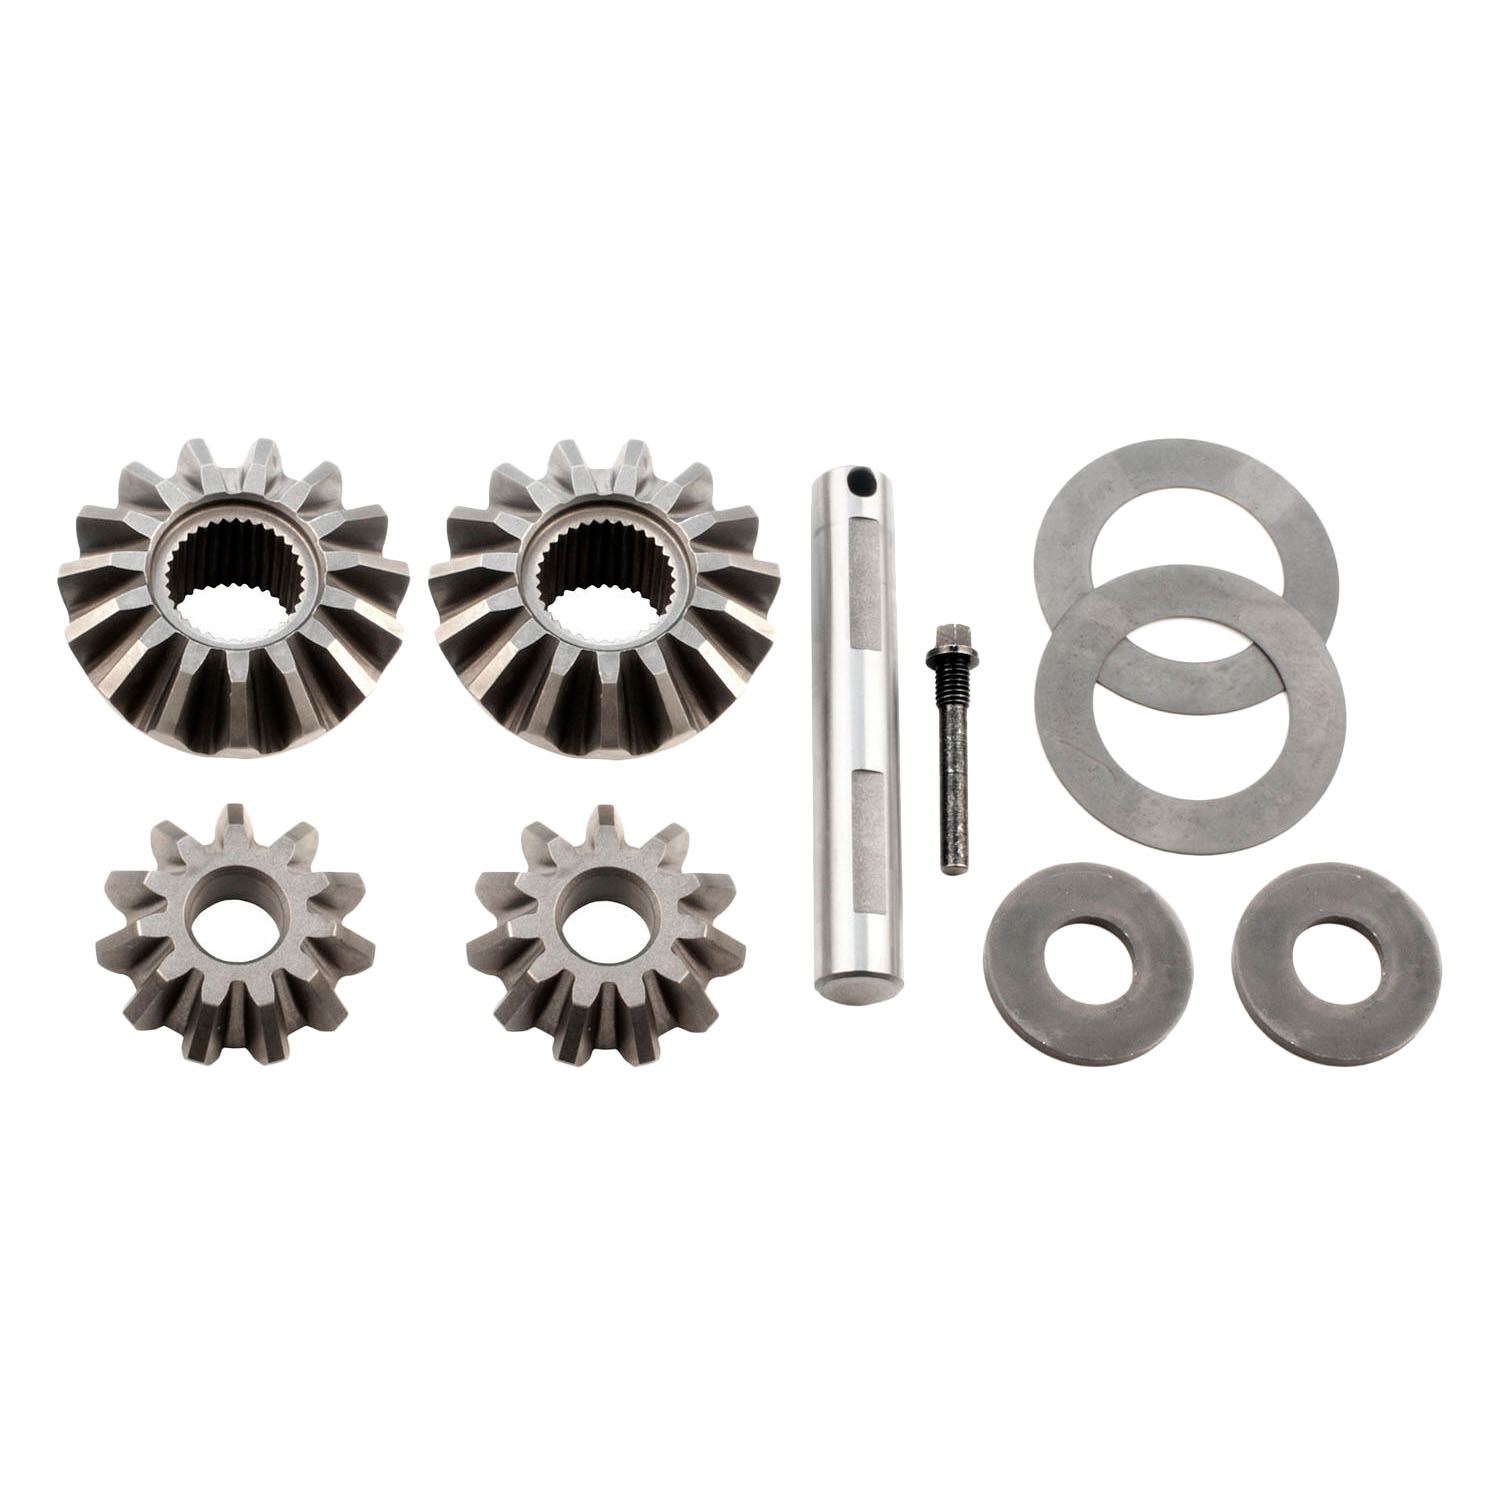 EXCEL from Richmond XL-4060 Differential Carrier Gear Kit